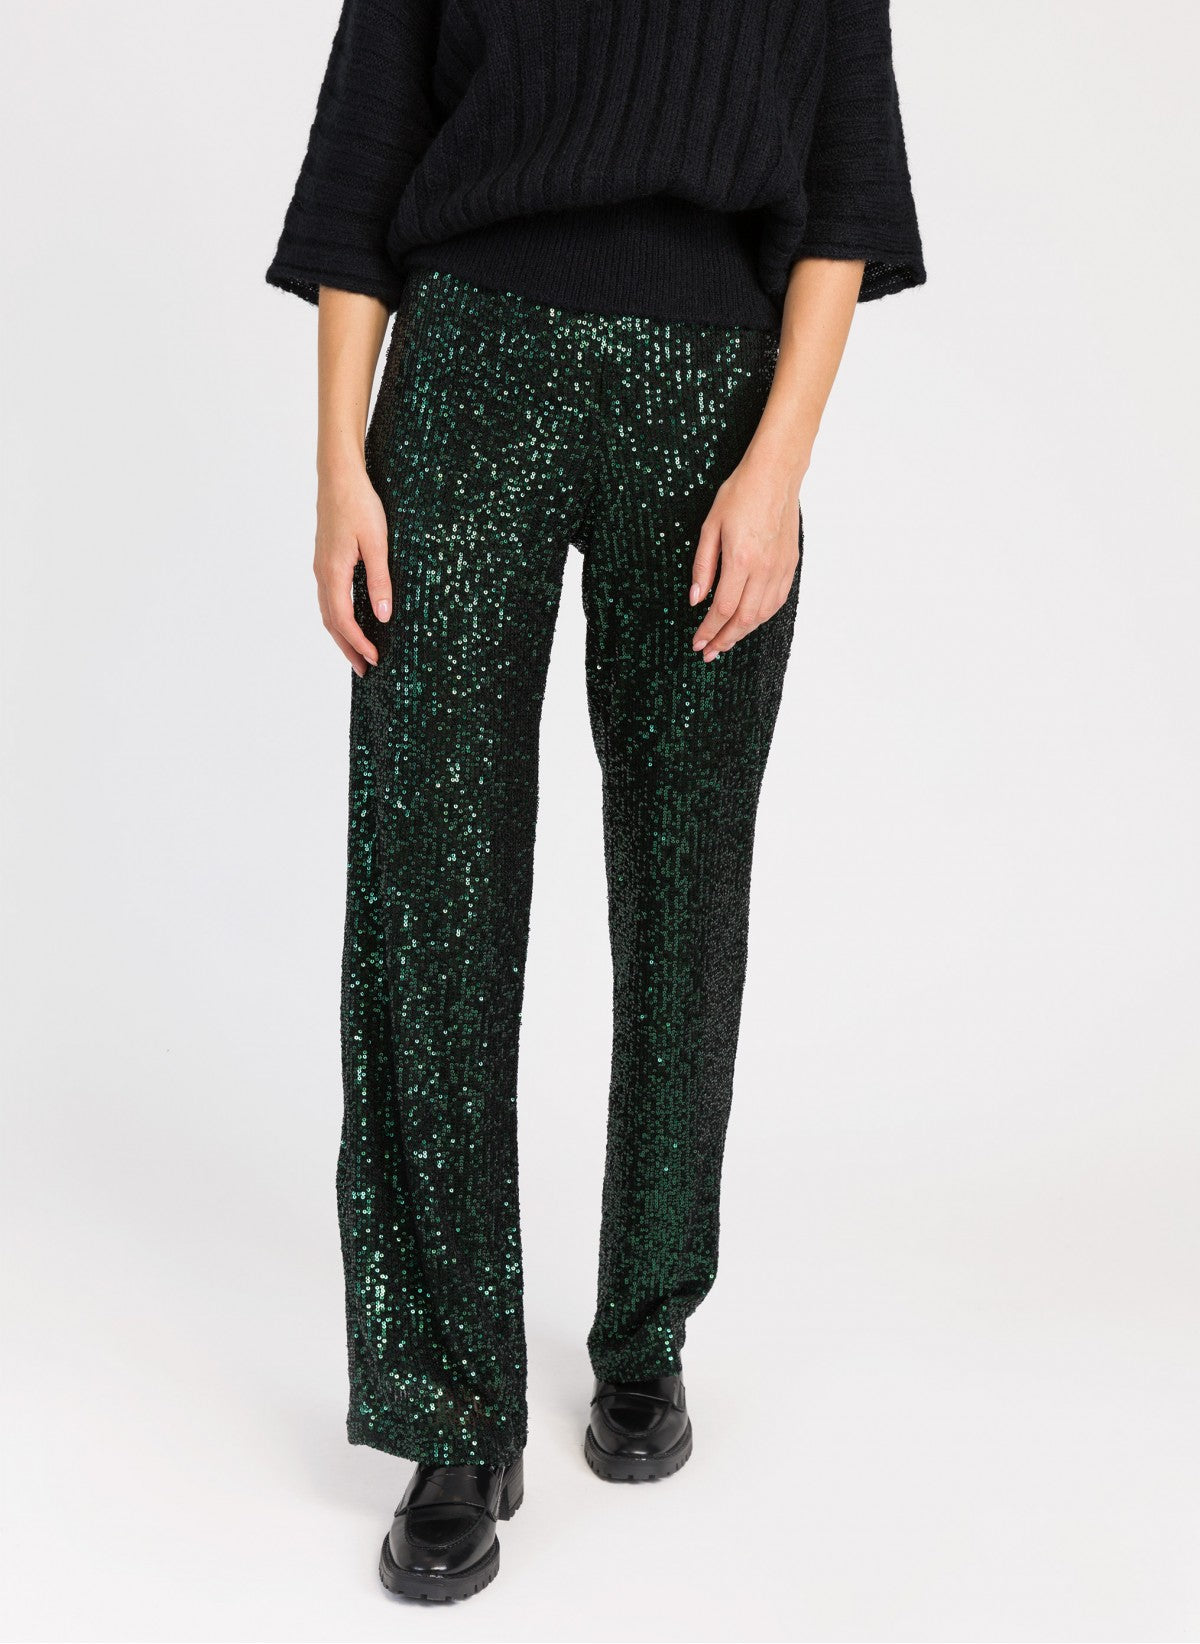 Sequin trousers in forest green